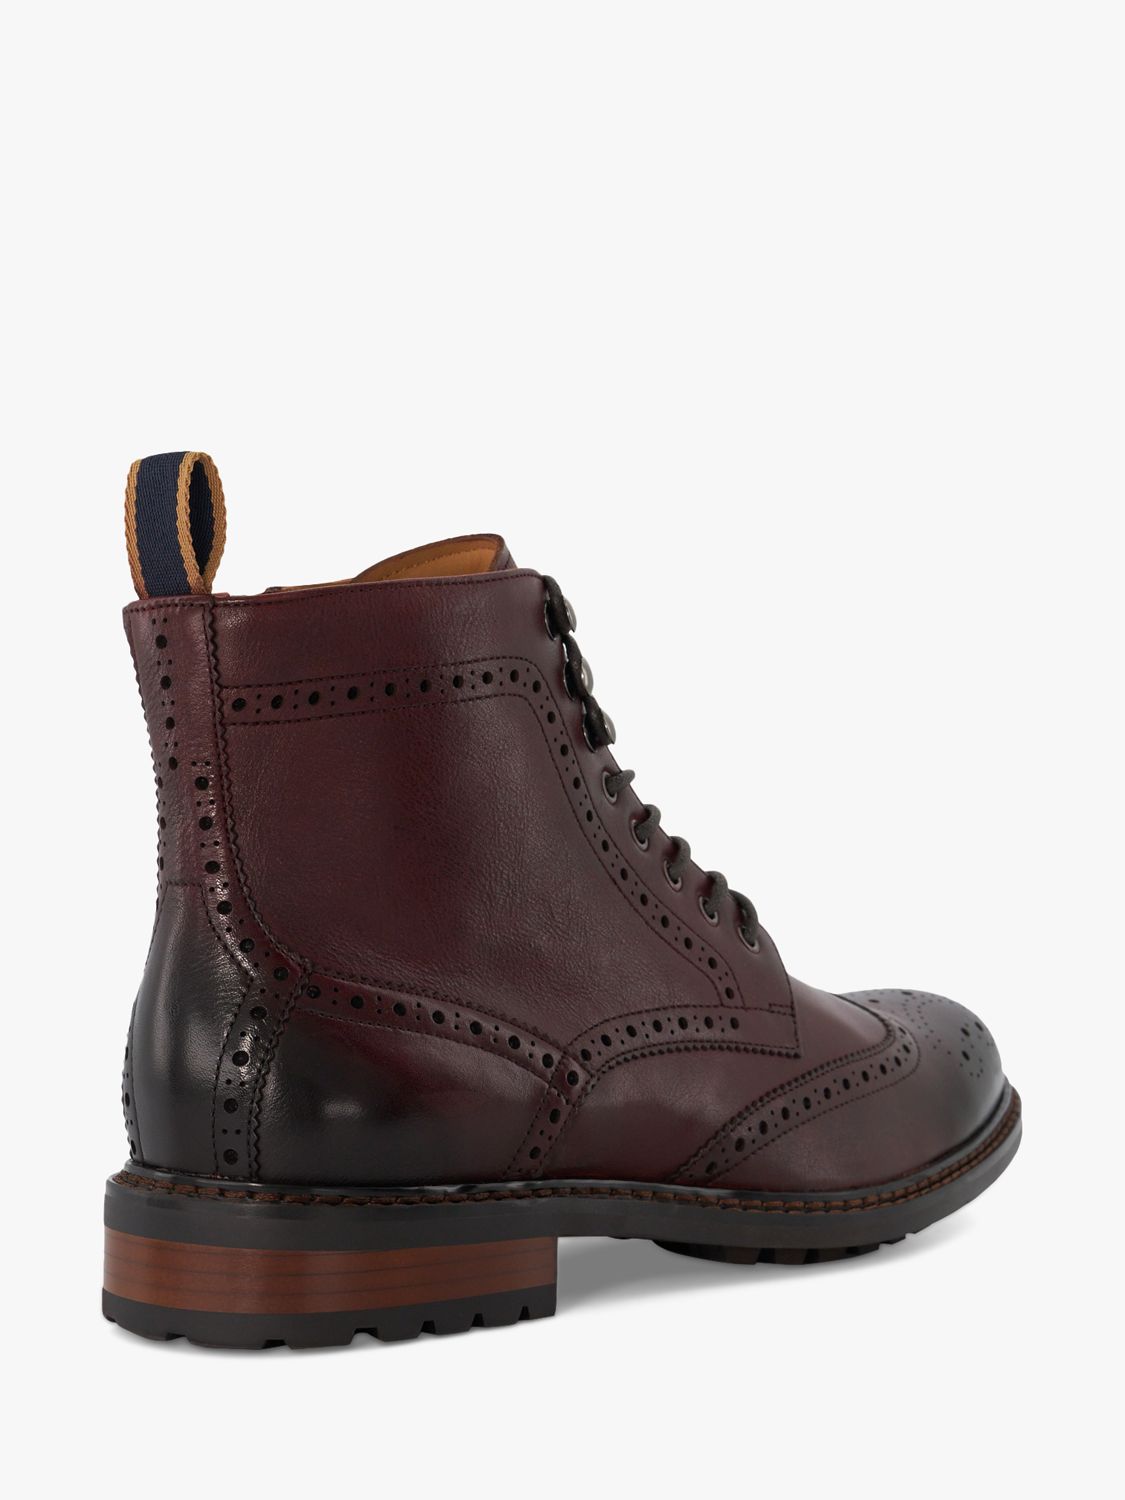 Buy Dune Colonies Eyelet Leather Brogue Boots, Bordeaux Online at johnlewis.com